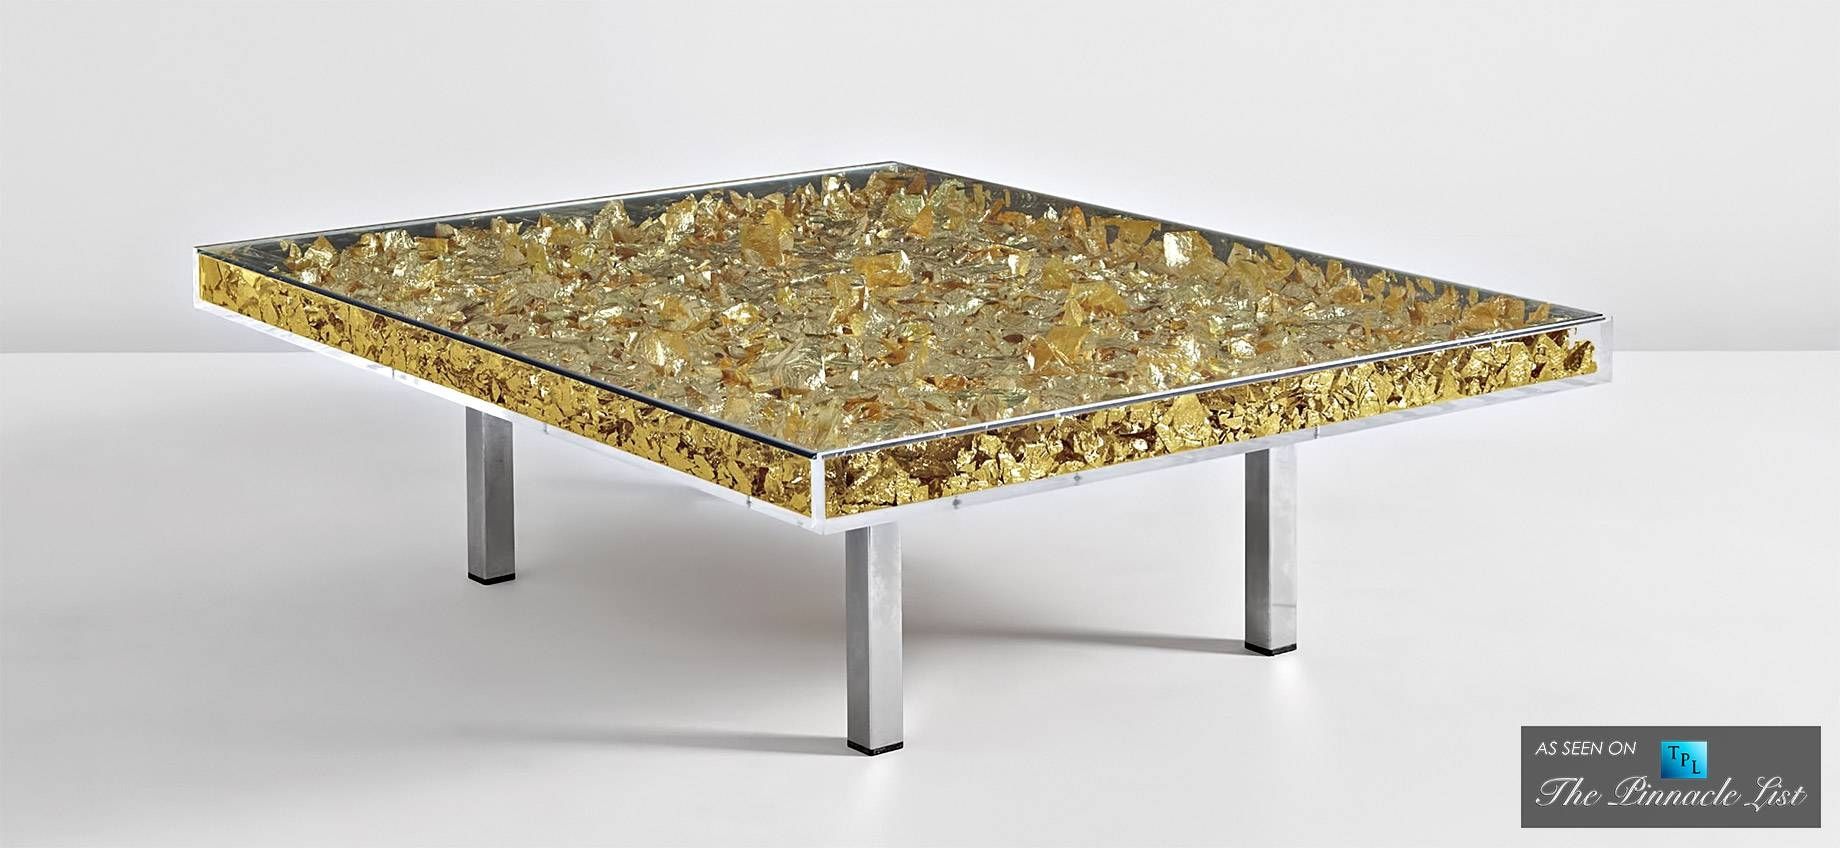 Contemporary Art As Modern Luxury Furniture – Spotlighting The In Art Coffee Tables (View 7 of 30)